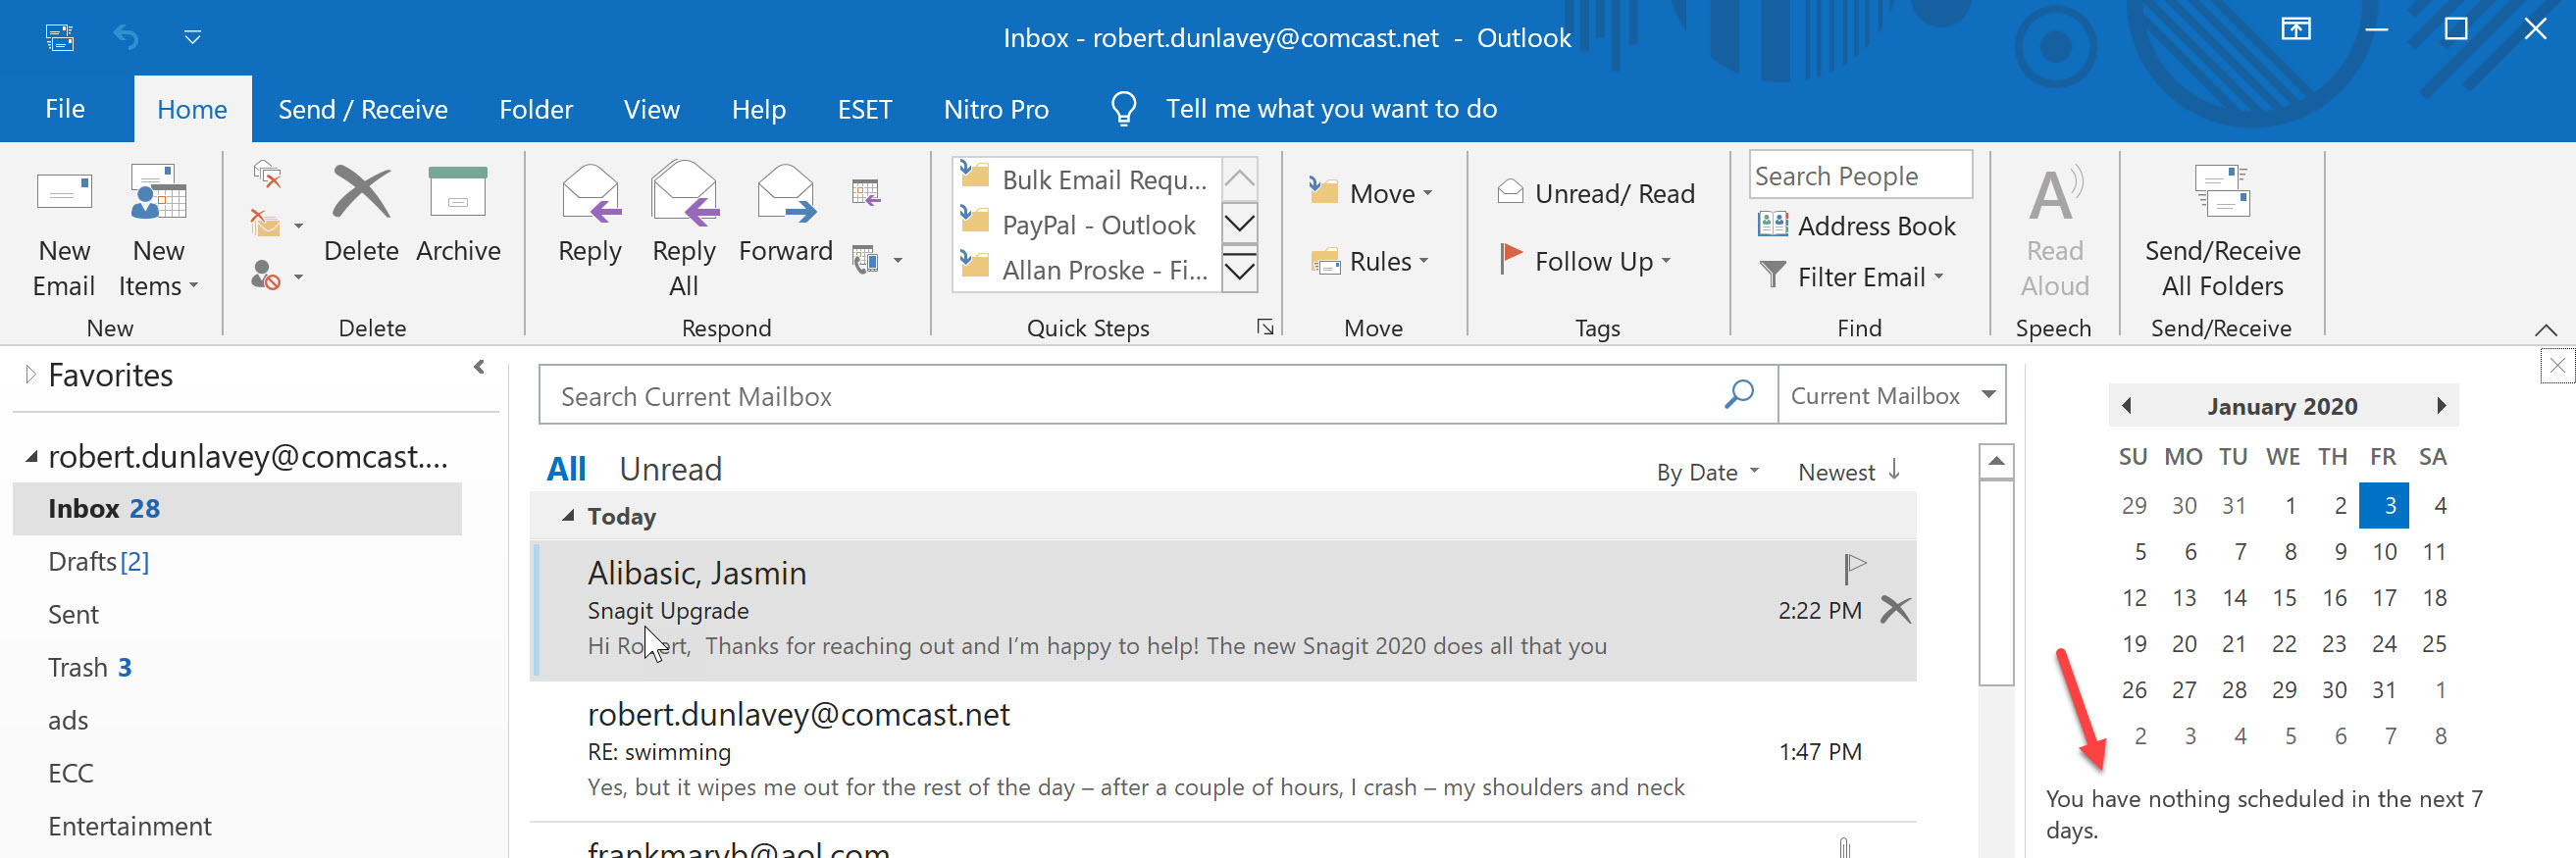 Outlook 2016 Not Syncing Calendars in quot Mail quot View vs quot Calendar quot View